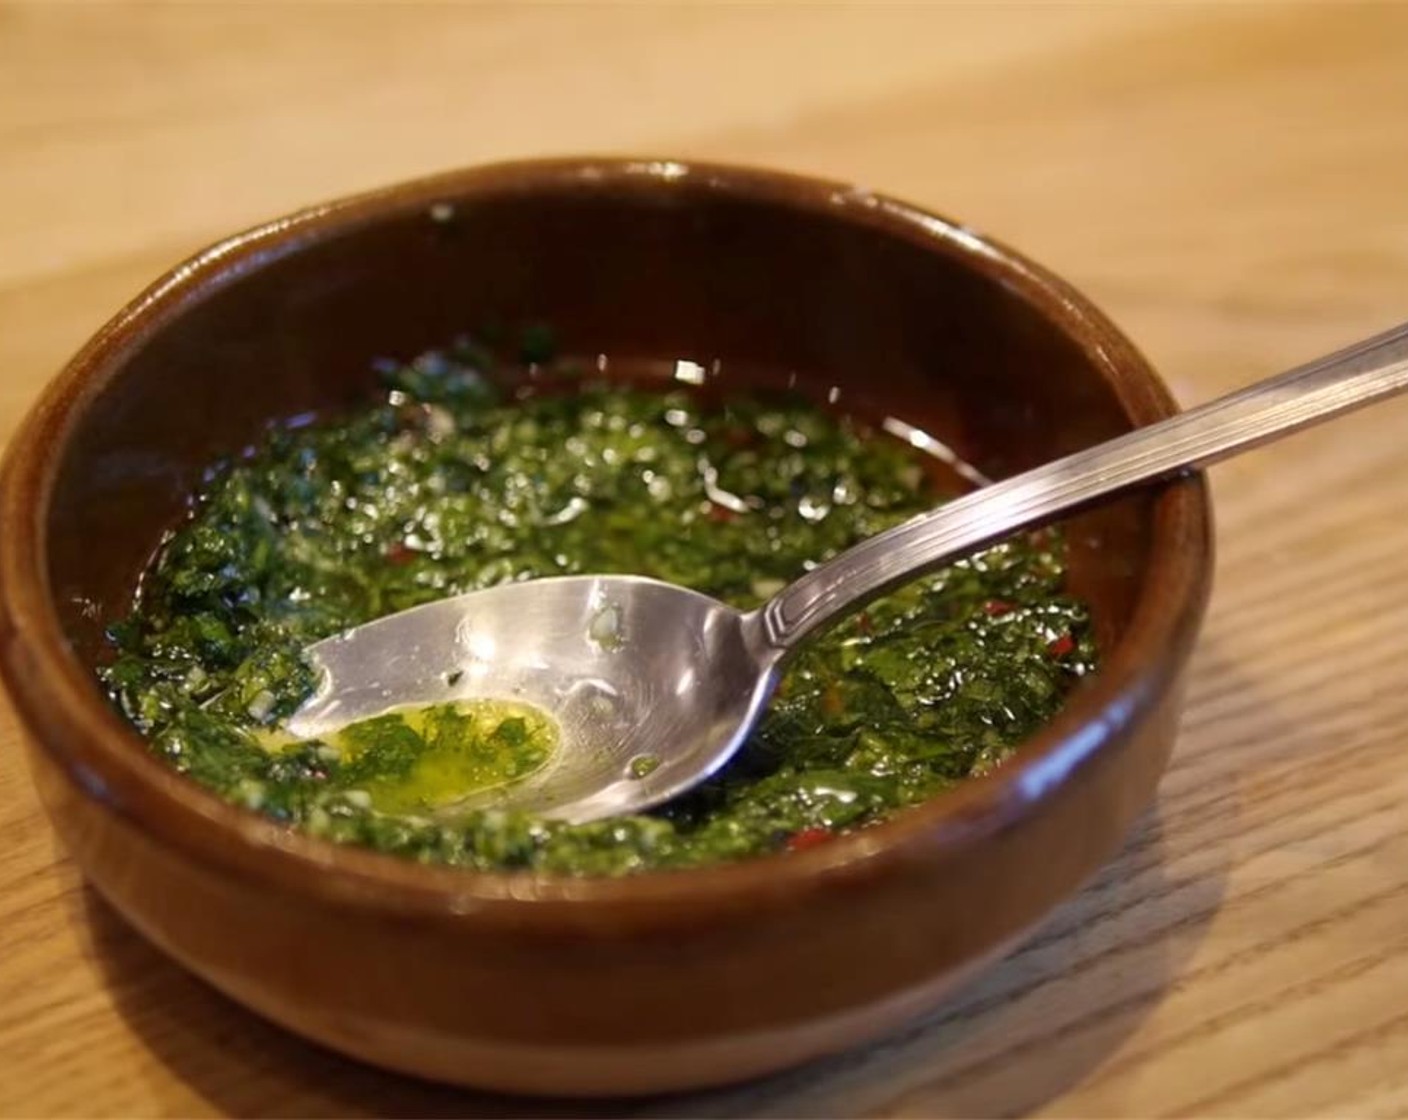 step 4 To make herb sauce, add Garlic (1 clove), Chili Pepper (1), Fresh Cilantro (1/2 bunch), and Salt (to taste) to a food processor, and process well. Transfer to a small bowl and add White Wine Vinegar (3 Tbsp) and Olive Oil (3 Tbsp). Mix well.